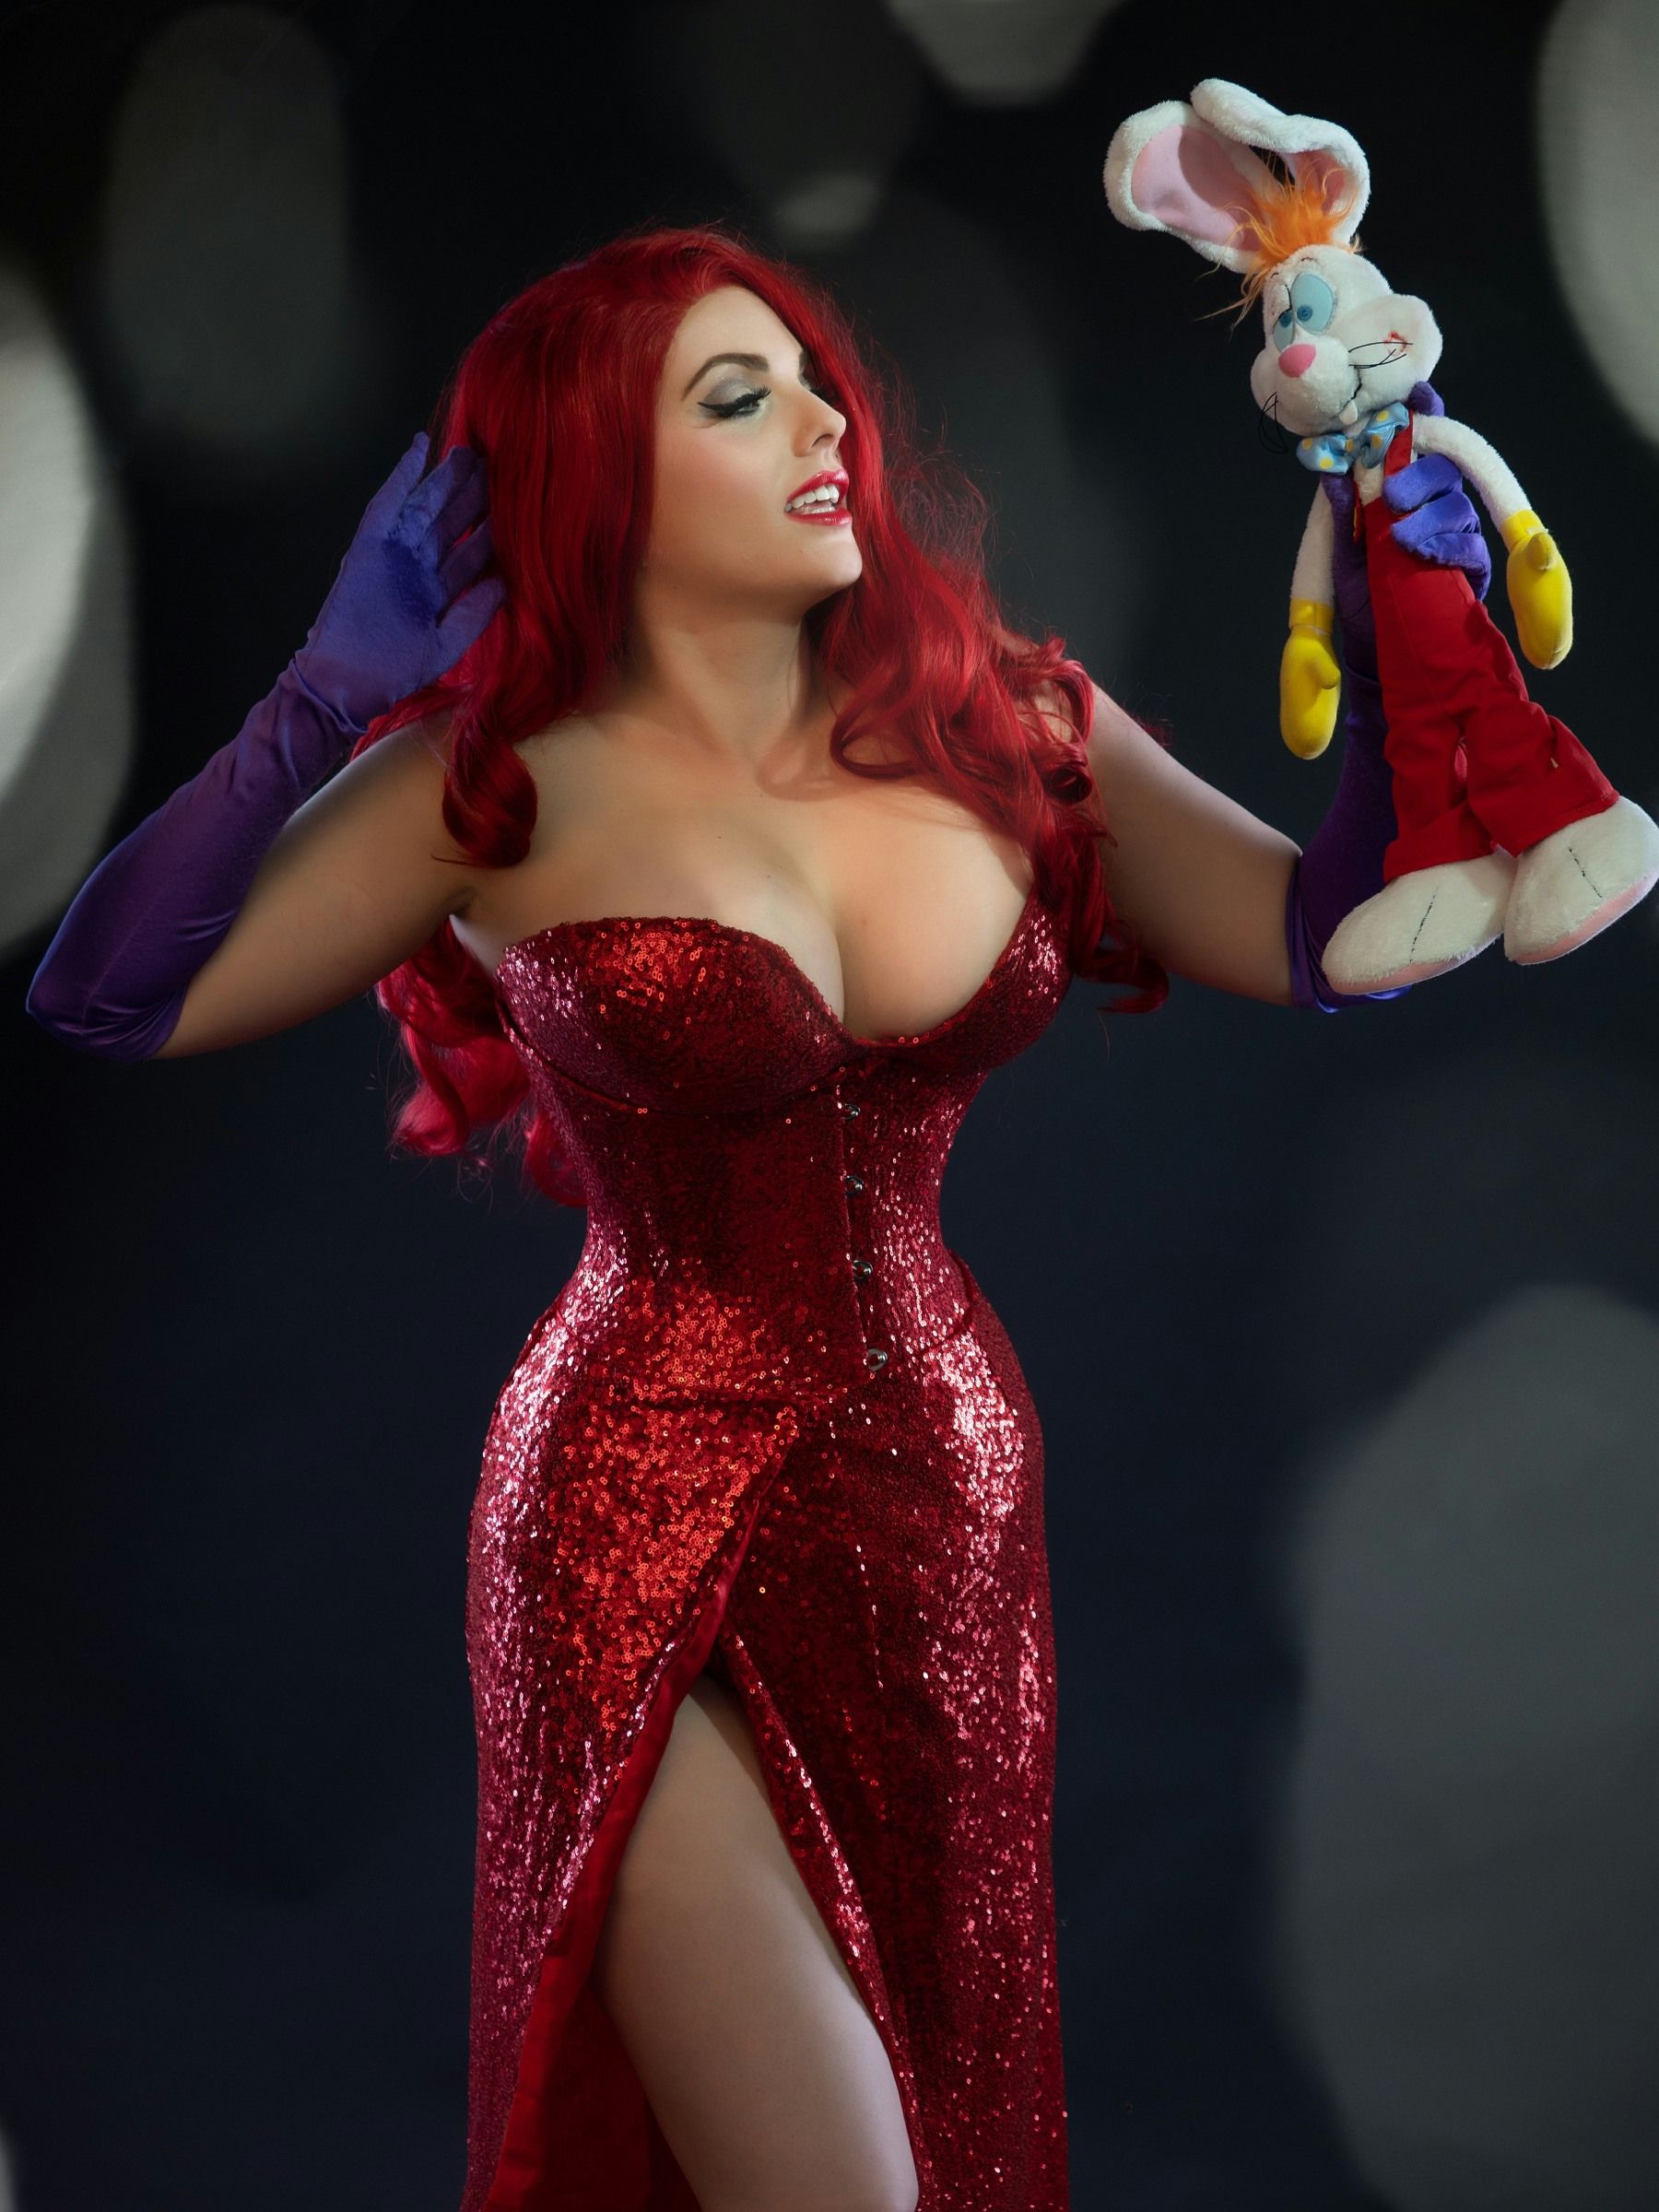 Jessica Rabbit act performing with roger rabbit toy character